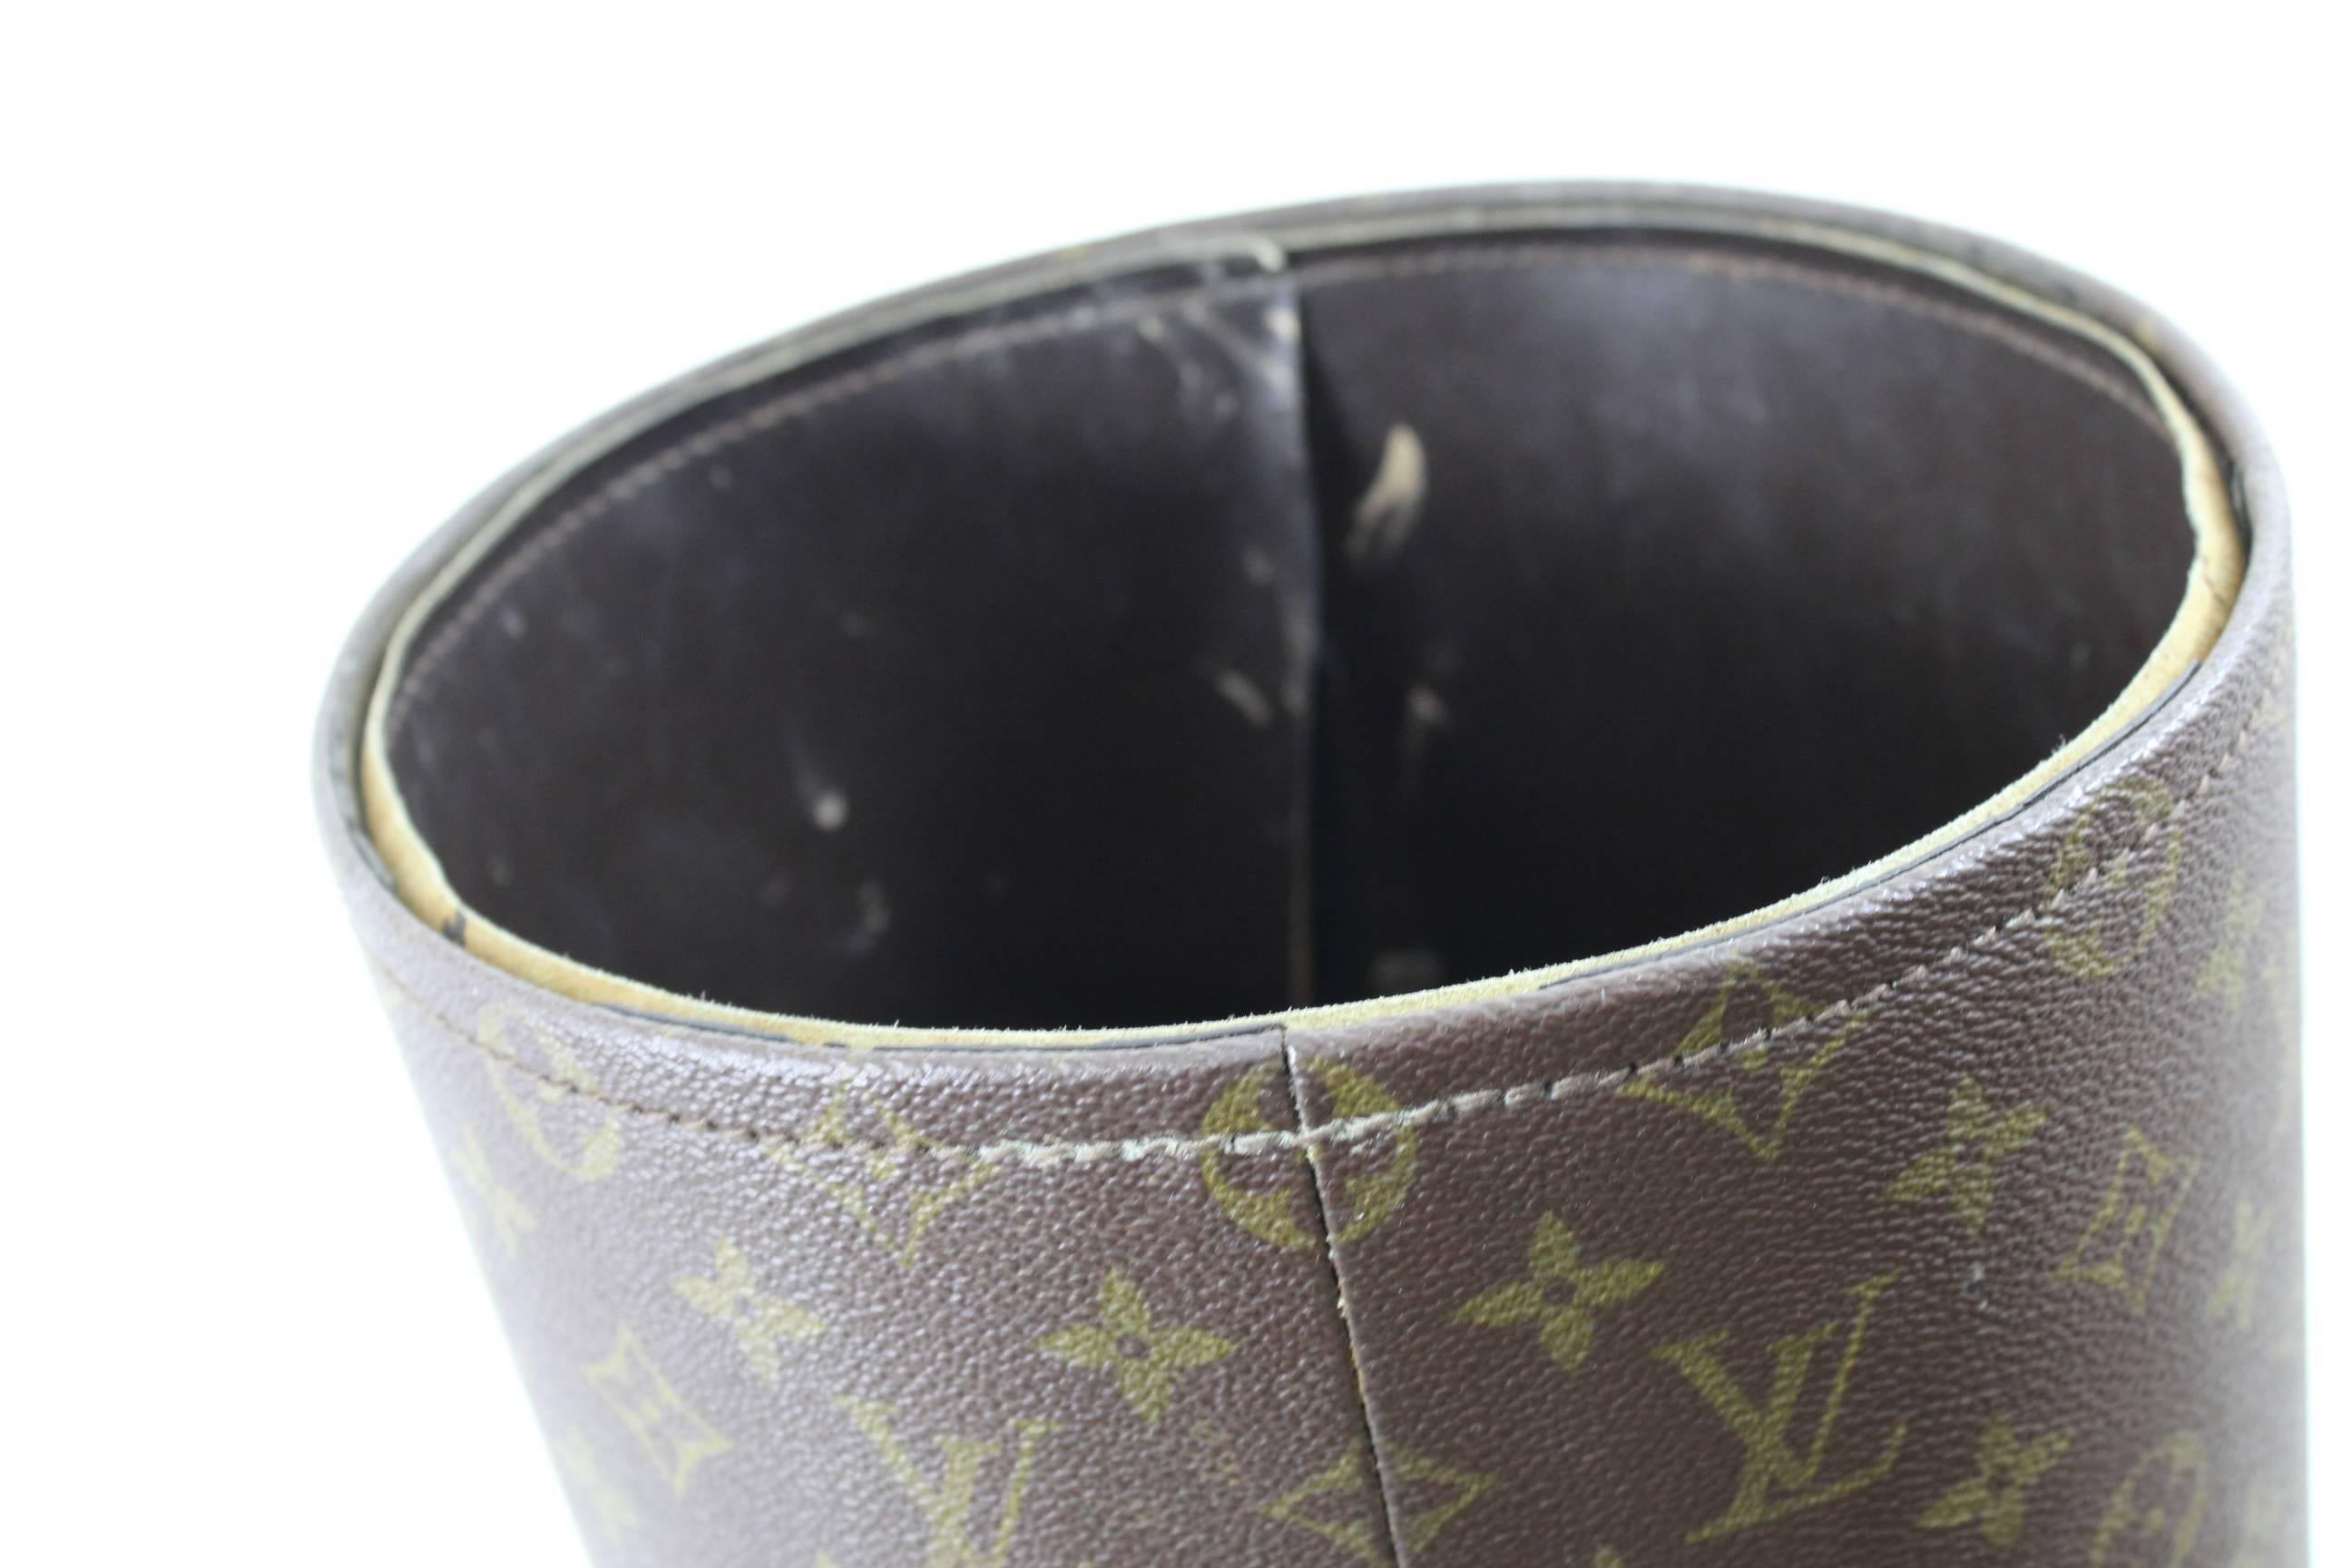 Realy rare objet a Louis Vuitton paper bin in moniogram canvas and leather. The edition of this item has been really limited.

The item is in fair condtion as the inner part is unglued and the border too ( it can be easily repaired by an